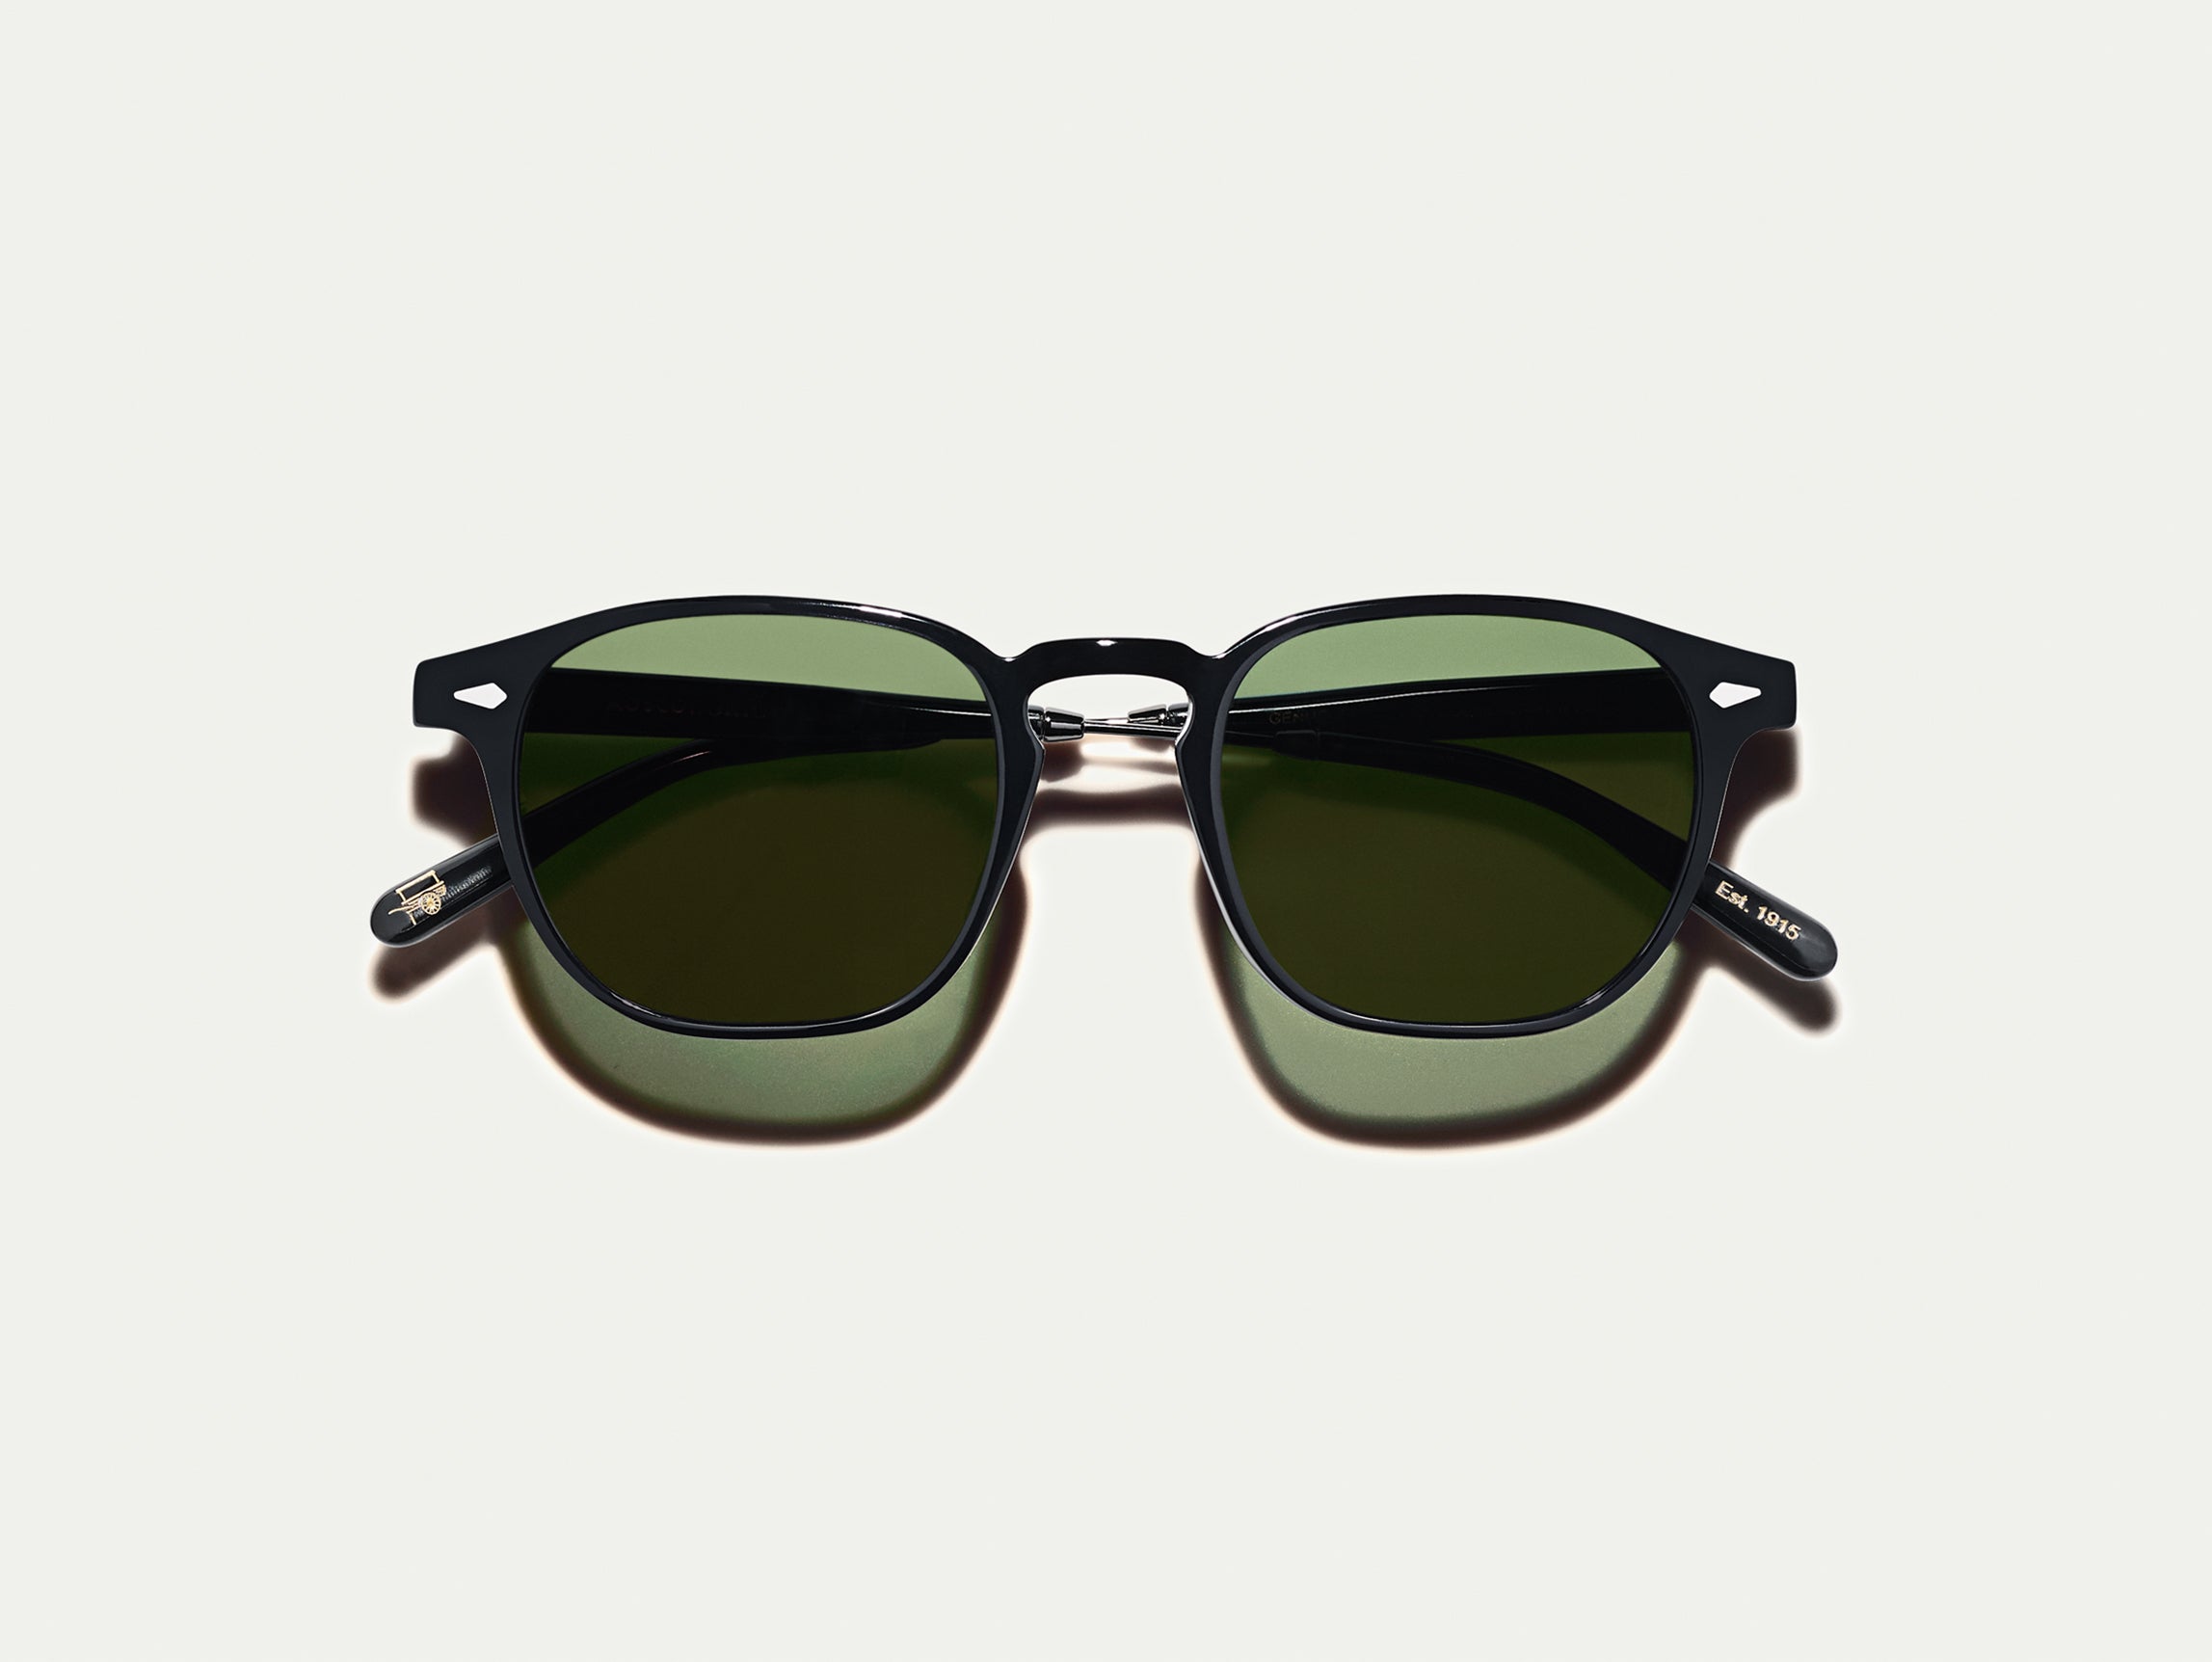 The GENUG SUN in Black/Pewter with G-15 Glass Lenses